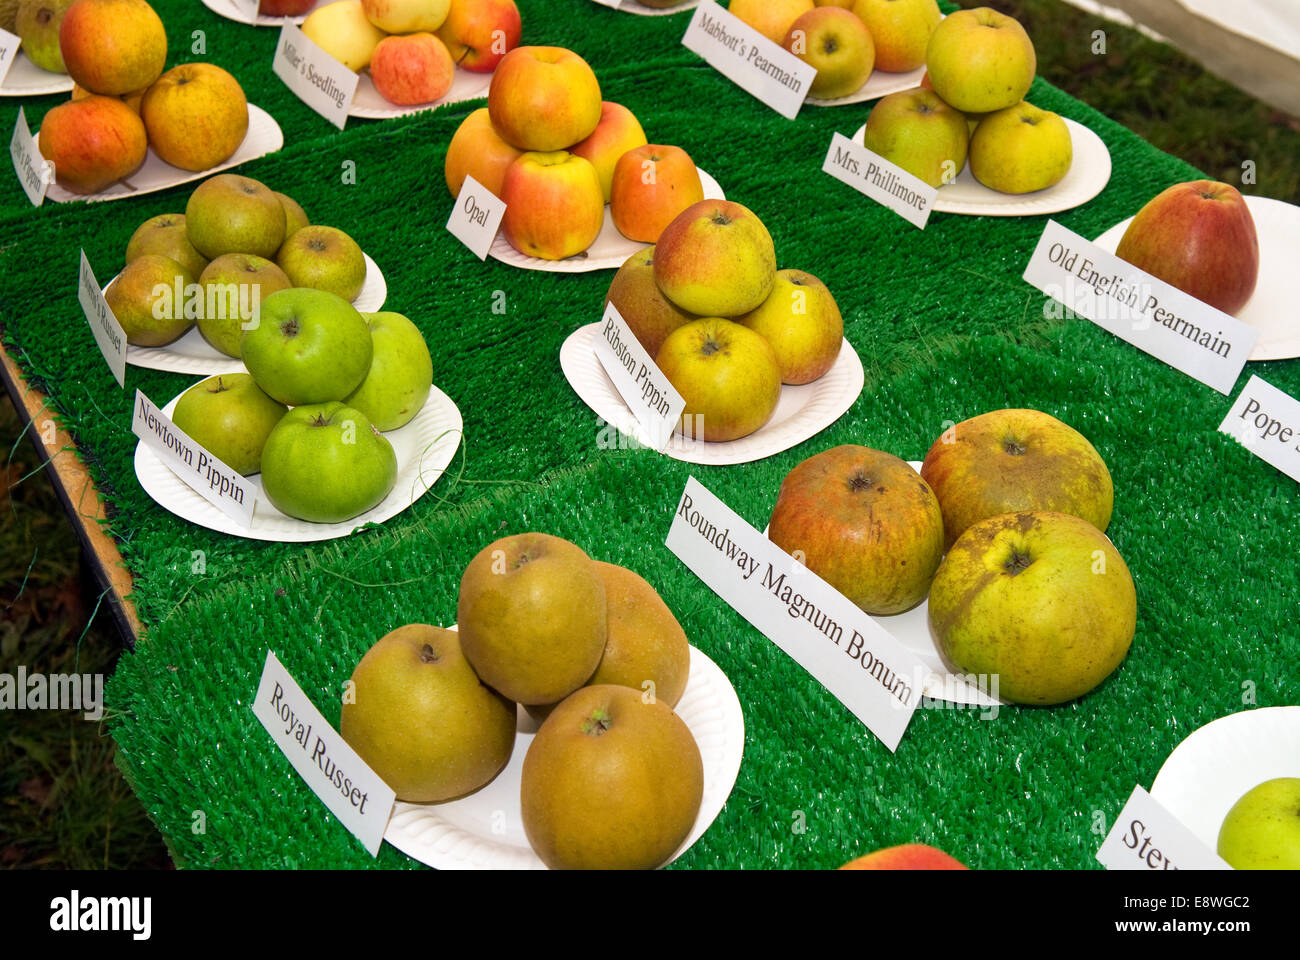 Varieties of apples on show at an Apple Tasting Day, Blackmoor, Hampshire, UK. Stock Photo